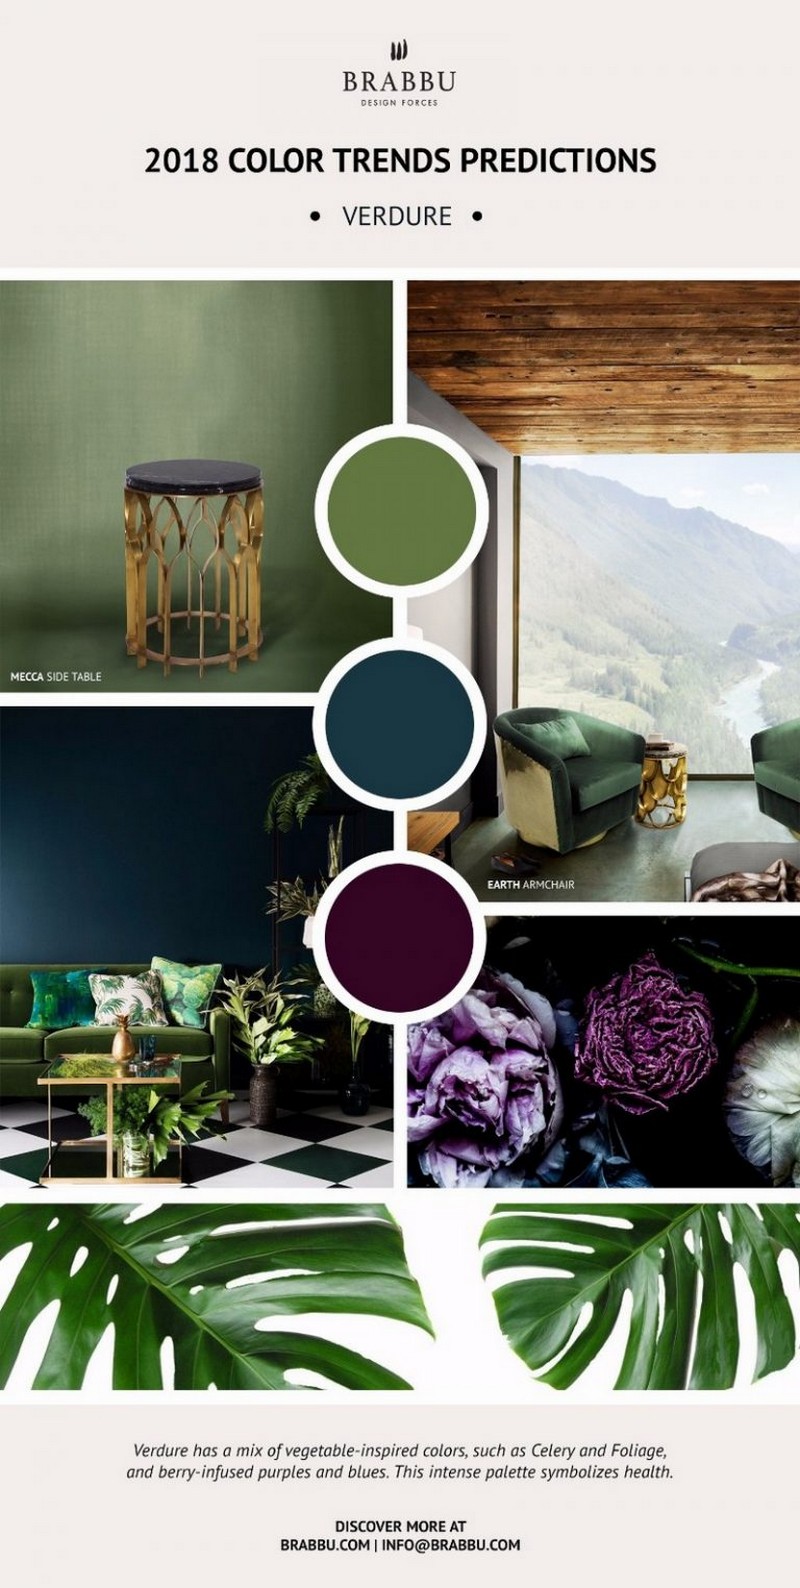 Discover More About Pantone's Color Trend Predictions for 2018 ➤ To see more news about the Interior Design Magazines, subscribe our newsletter right now! #interiordesignmagazines #bestdesignmagazines #interiordesign #designmagazines #pantone #pantone2018 #colorscheme #colorschemeideas @imagazines